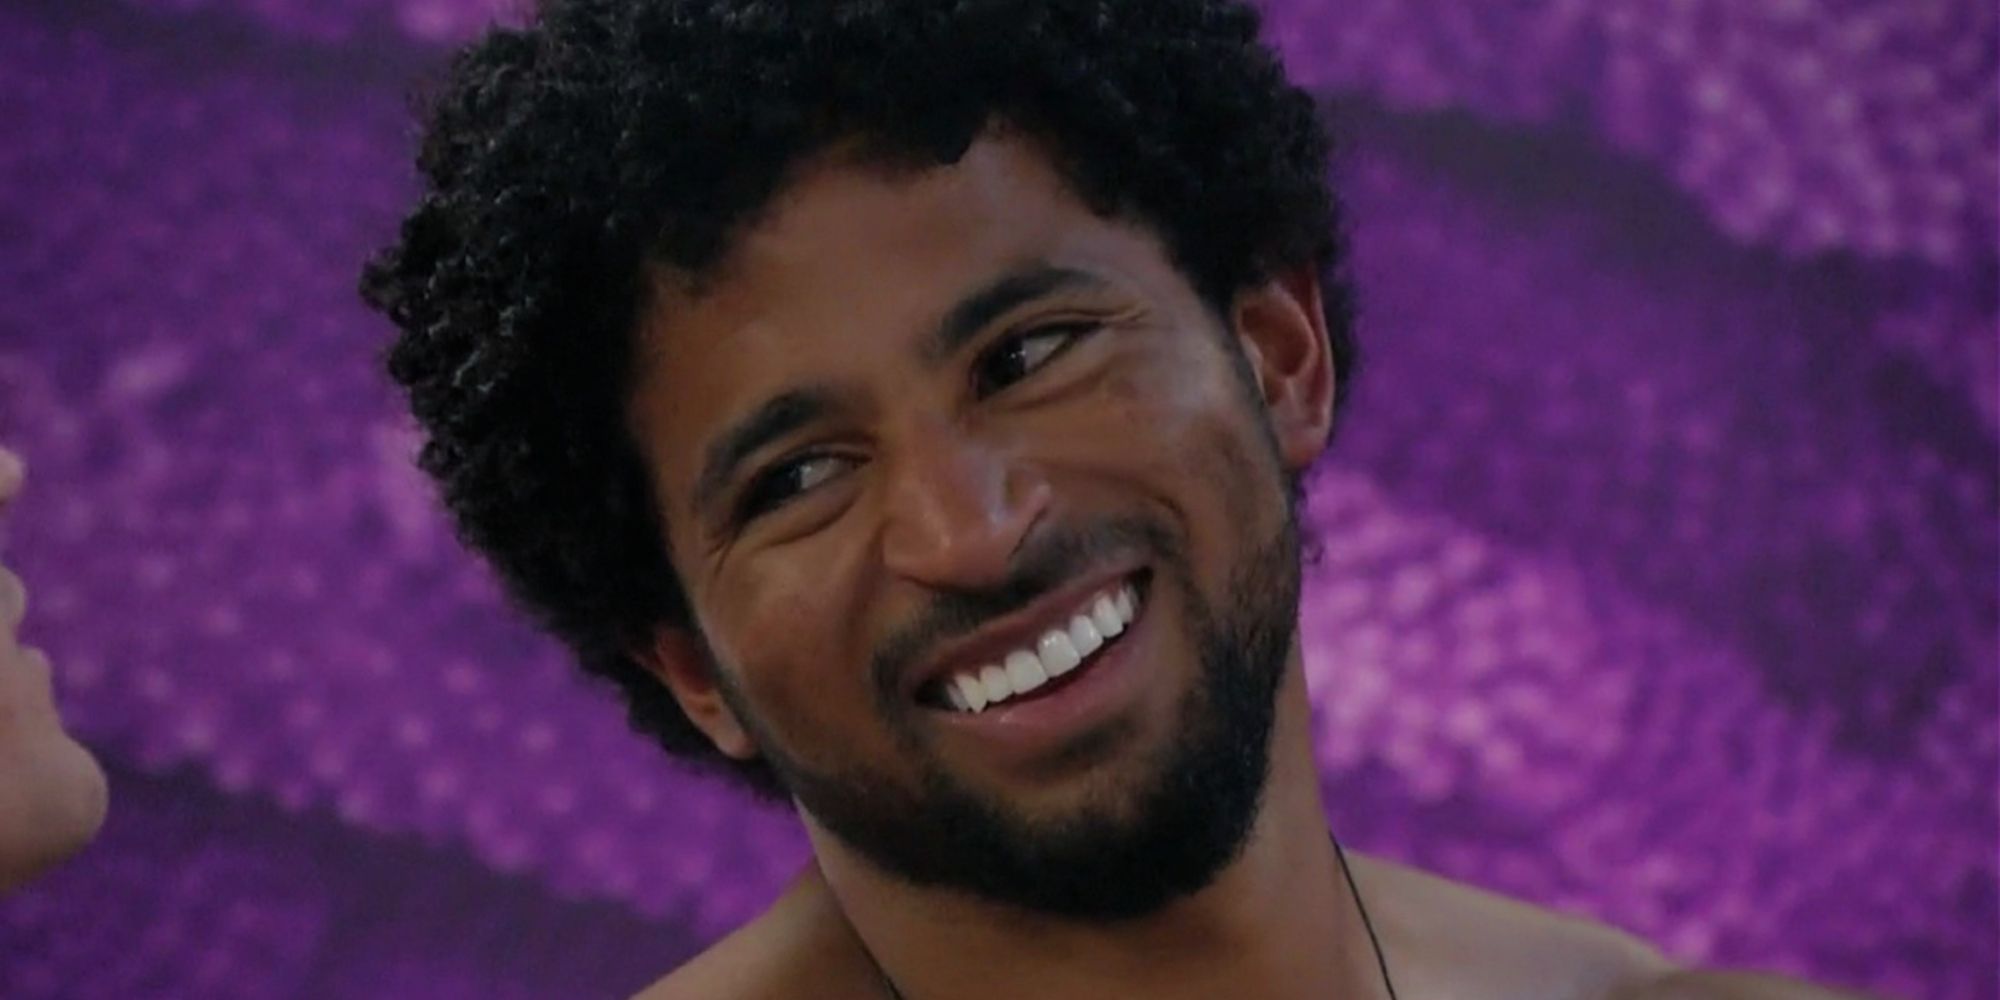 Kyland Young on Big Brother 23 smiling